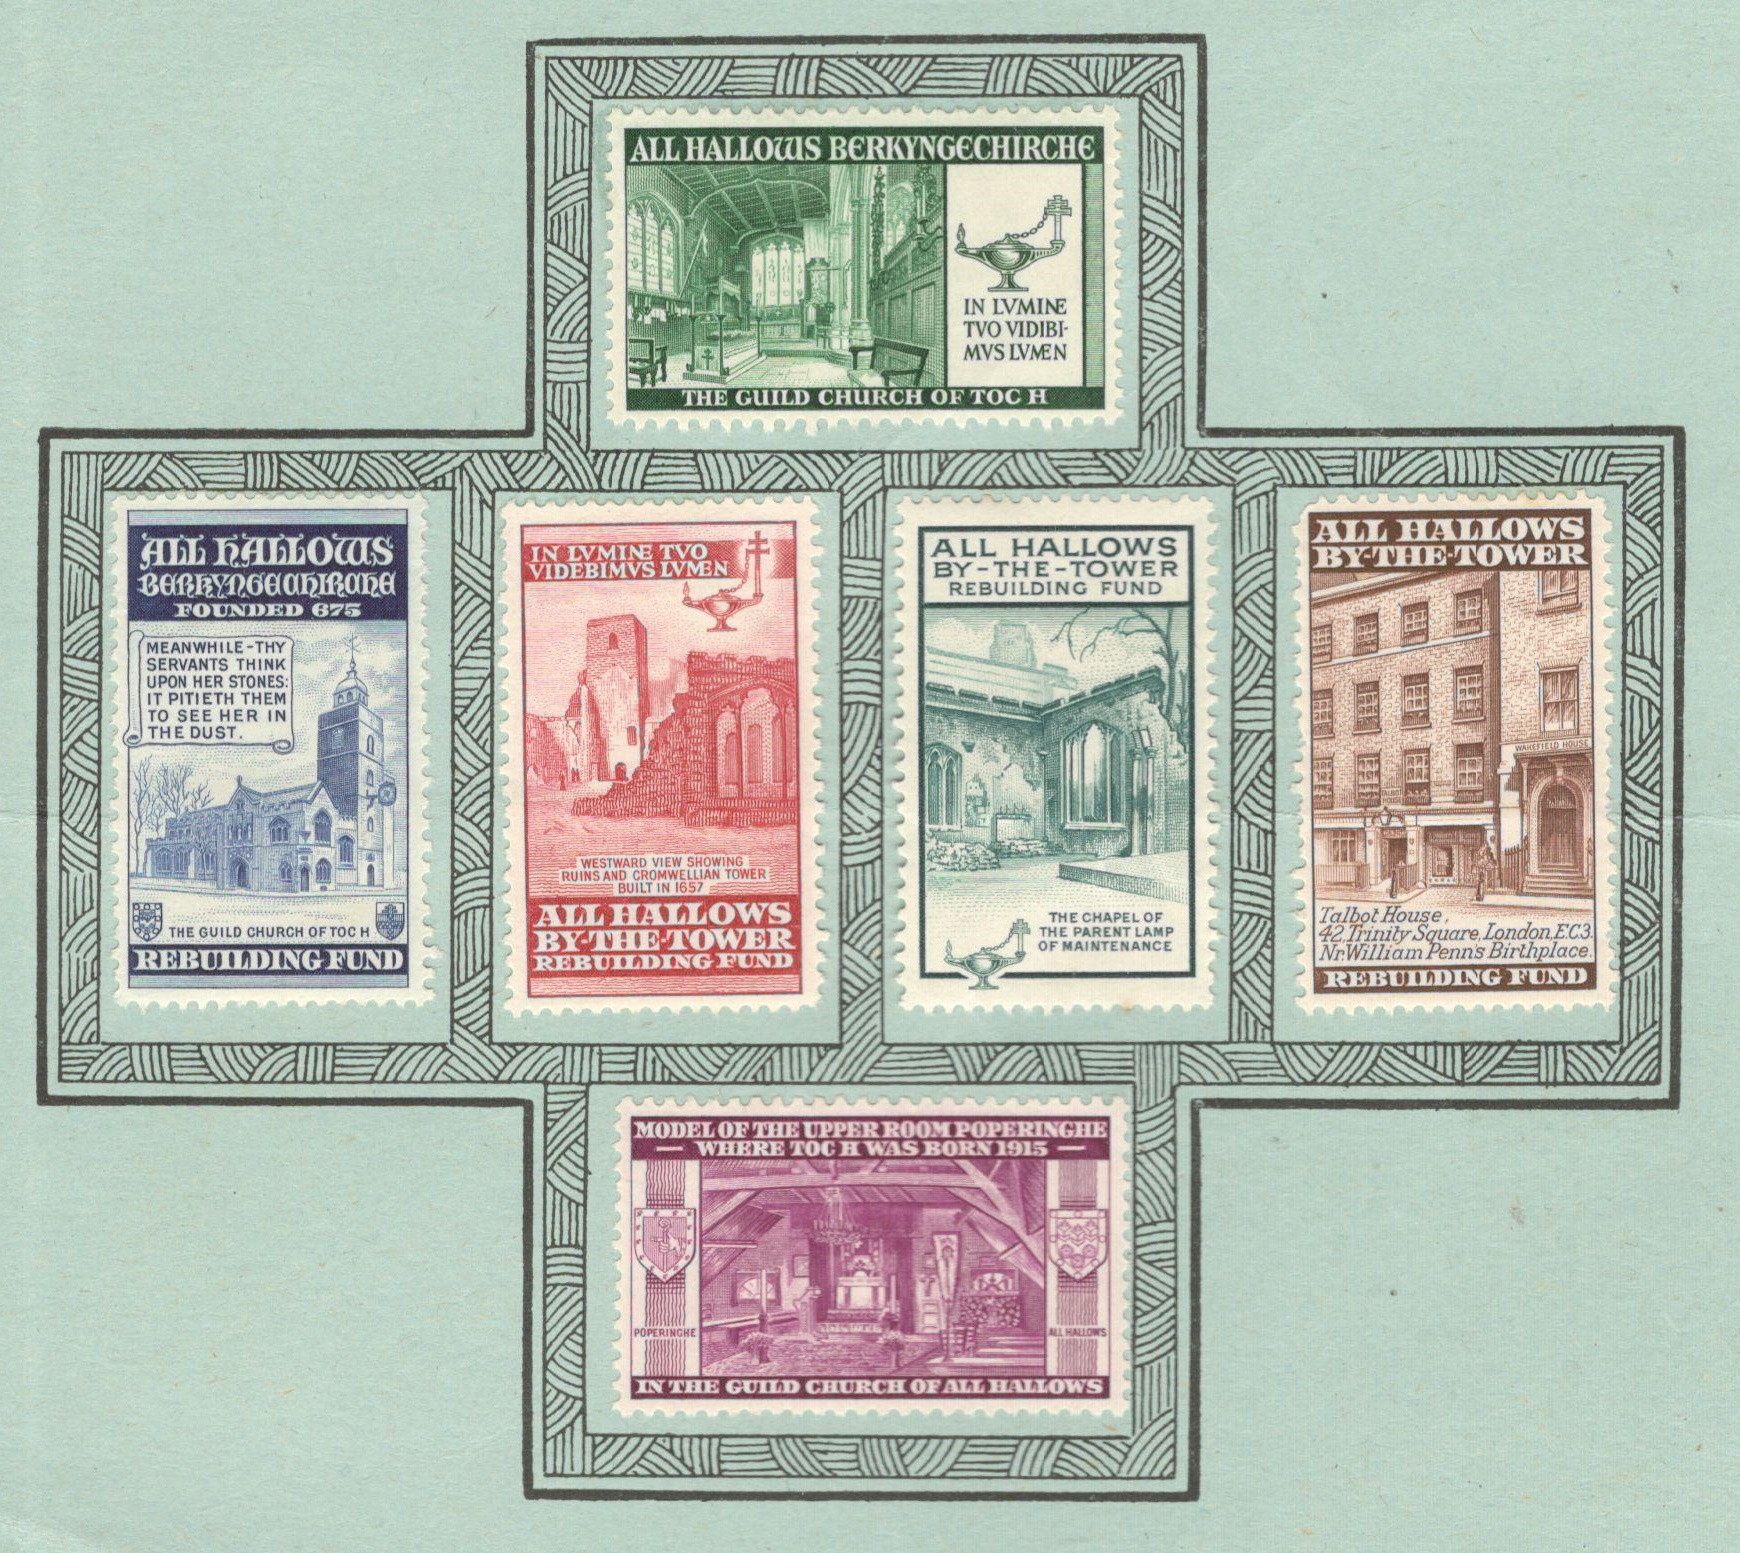 TALBOT HOUSE MEMBERS TICKET & SPECIAL SET OF STAMPS